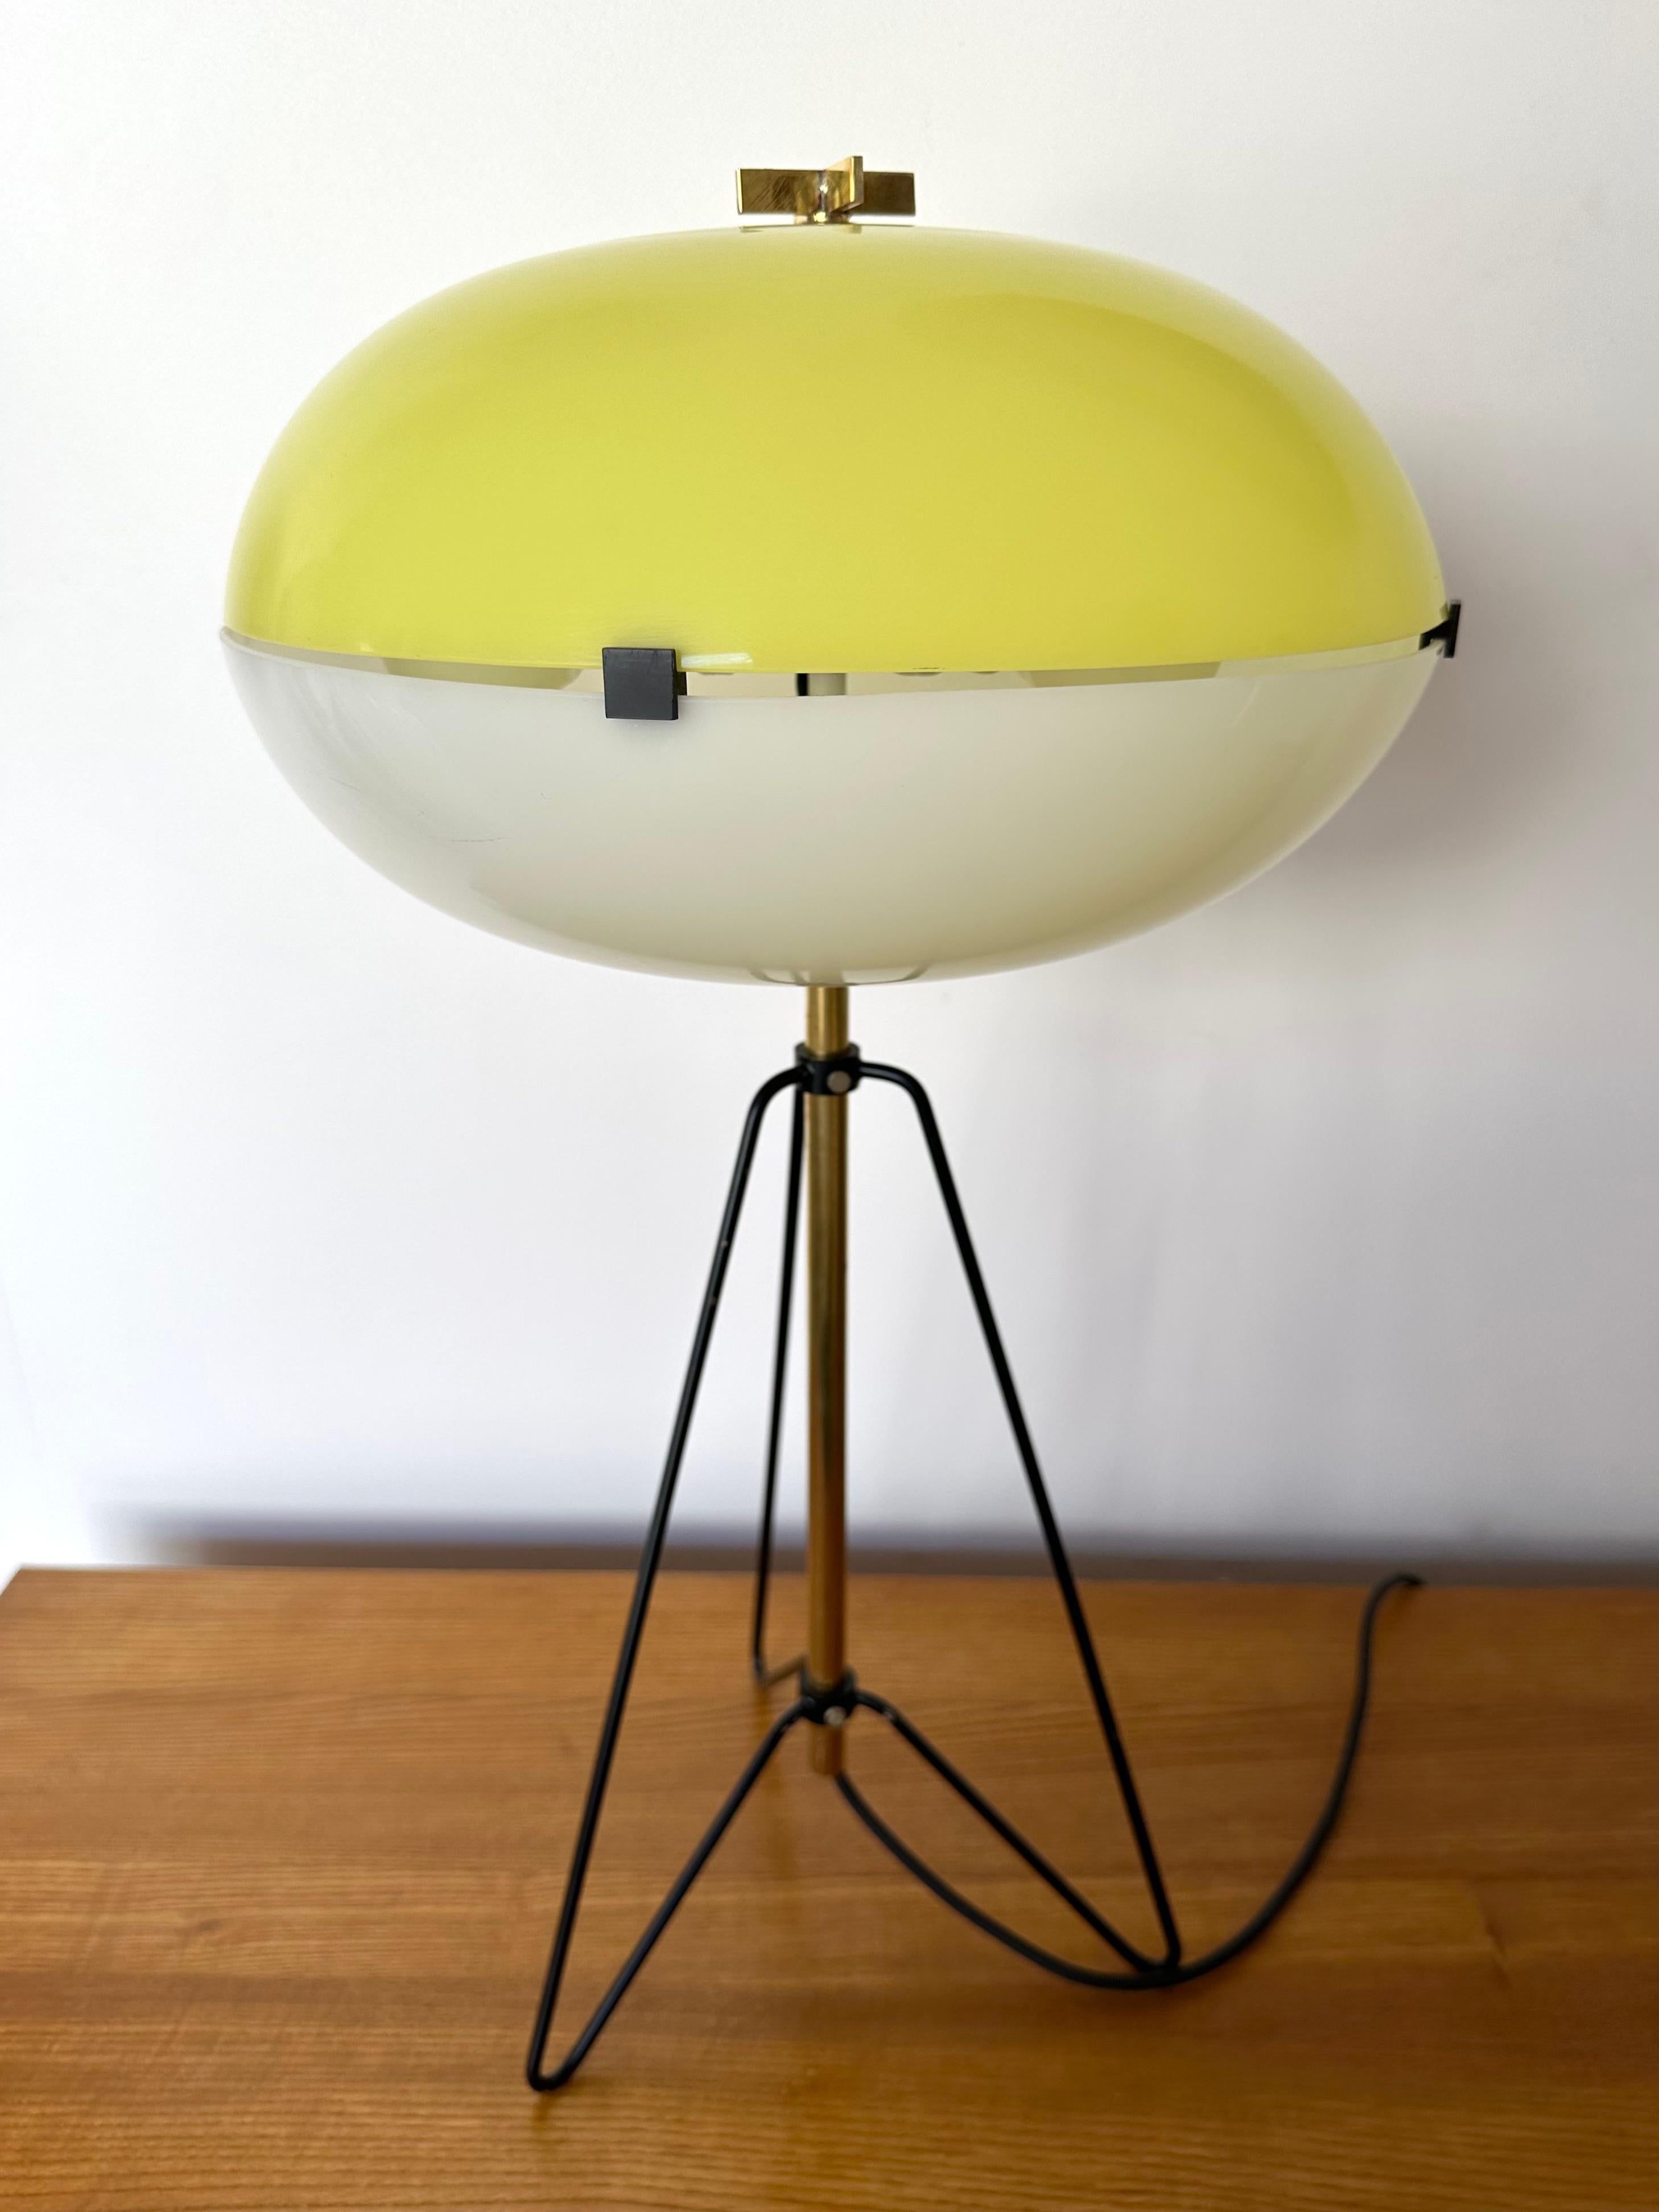 Lacquer Midcentury Table Lamp Methacrylate and Brass by Stilnovo, Italy, 1960s For Sale